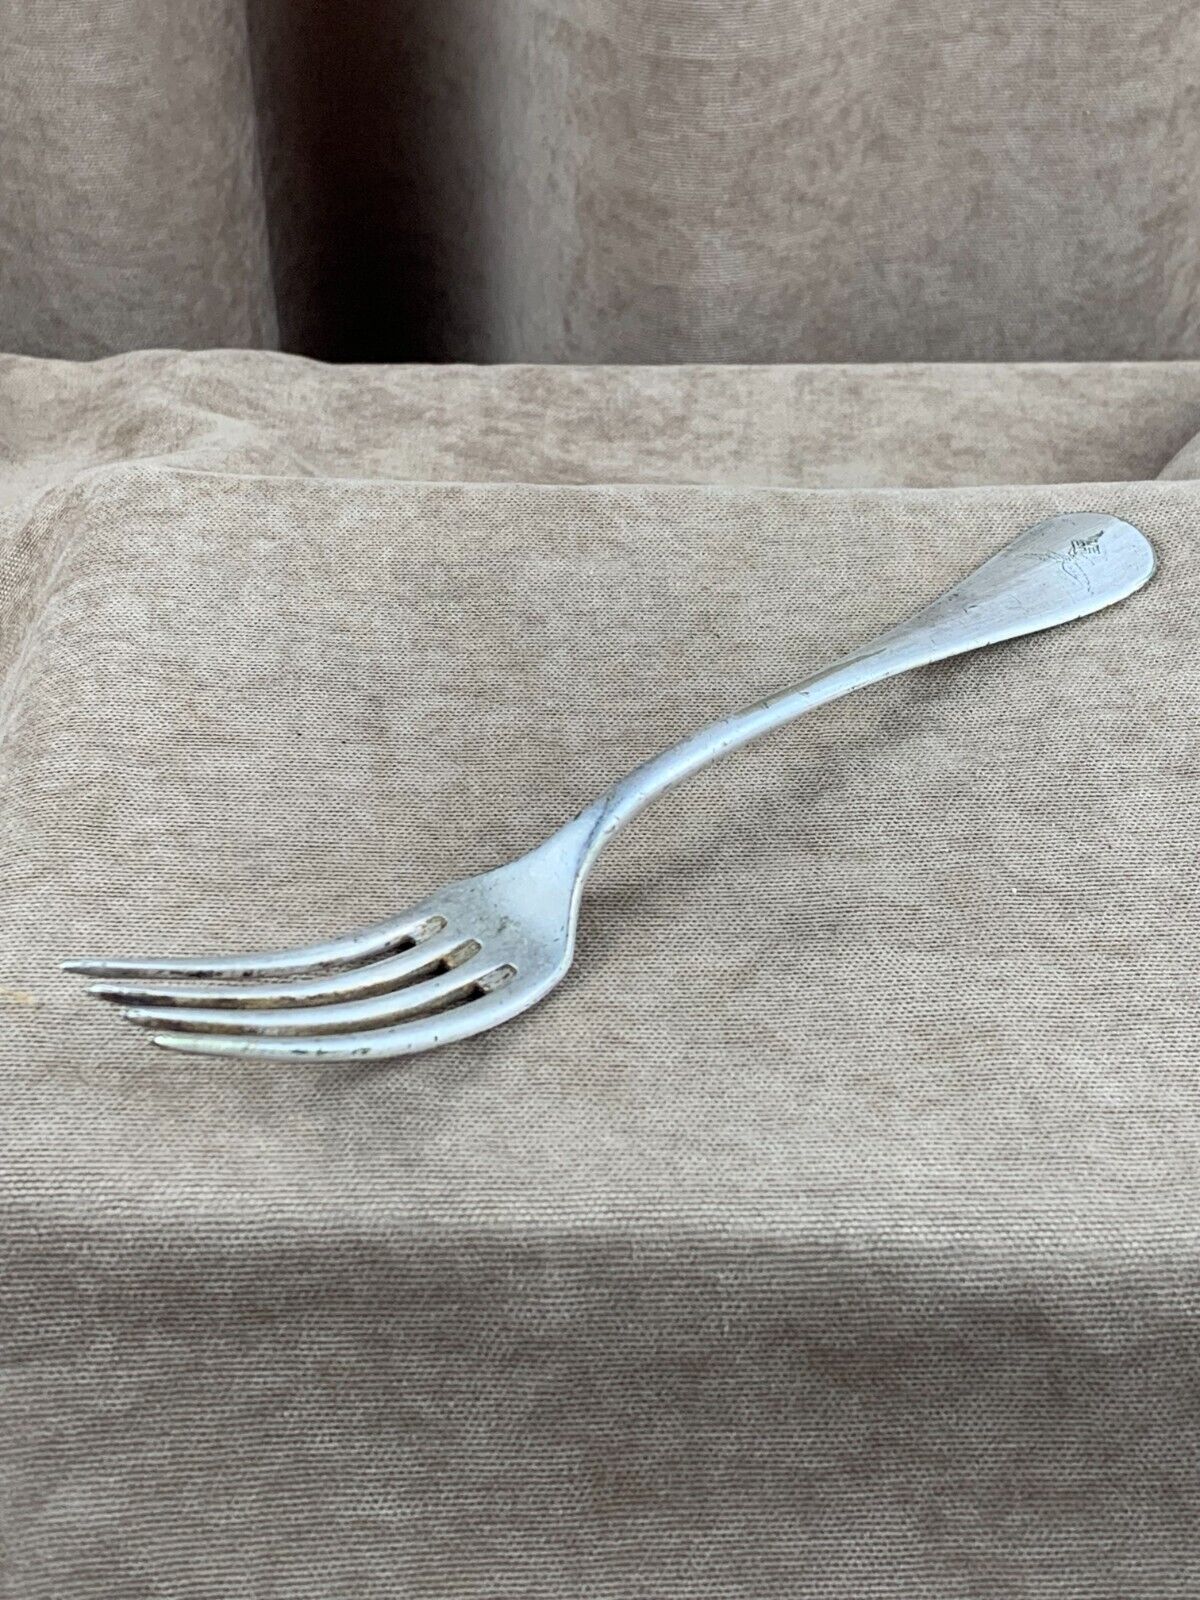 Dinner fork of flying troops. Wehrmacht 1936-1945 WWII WW2